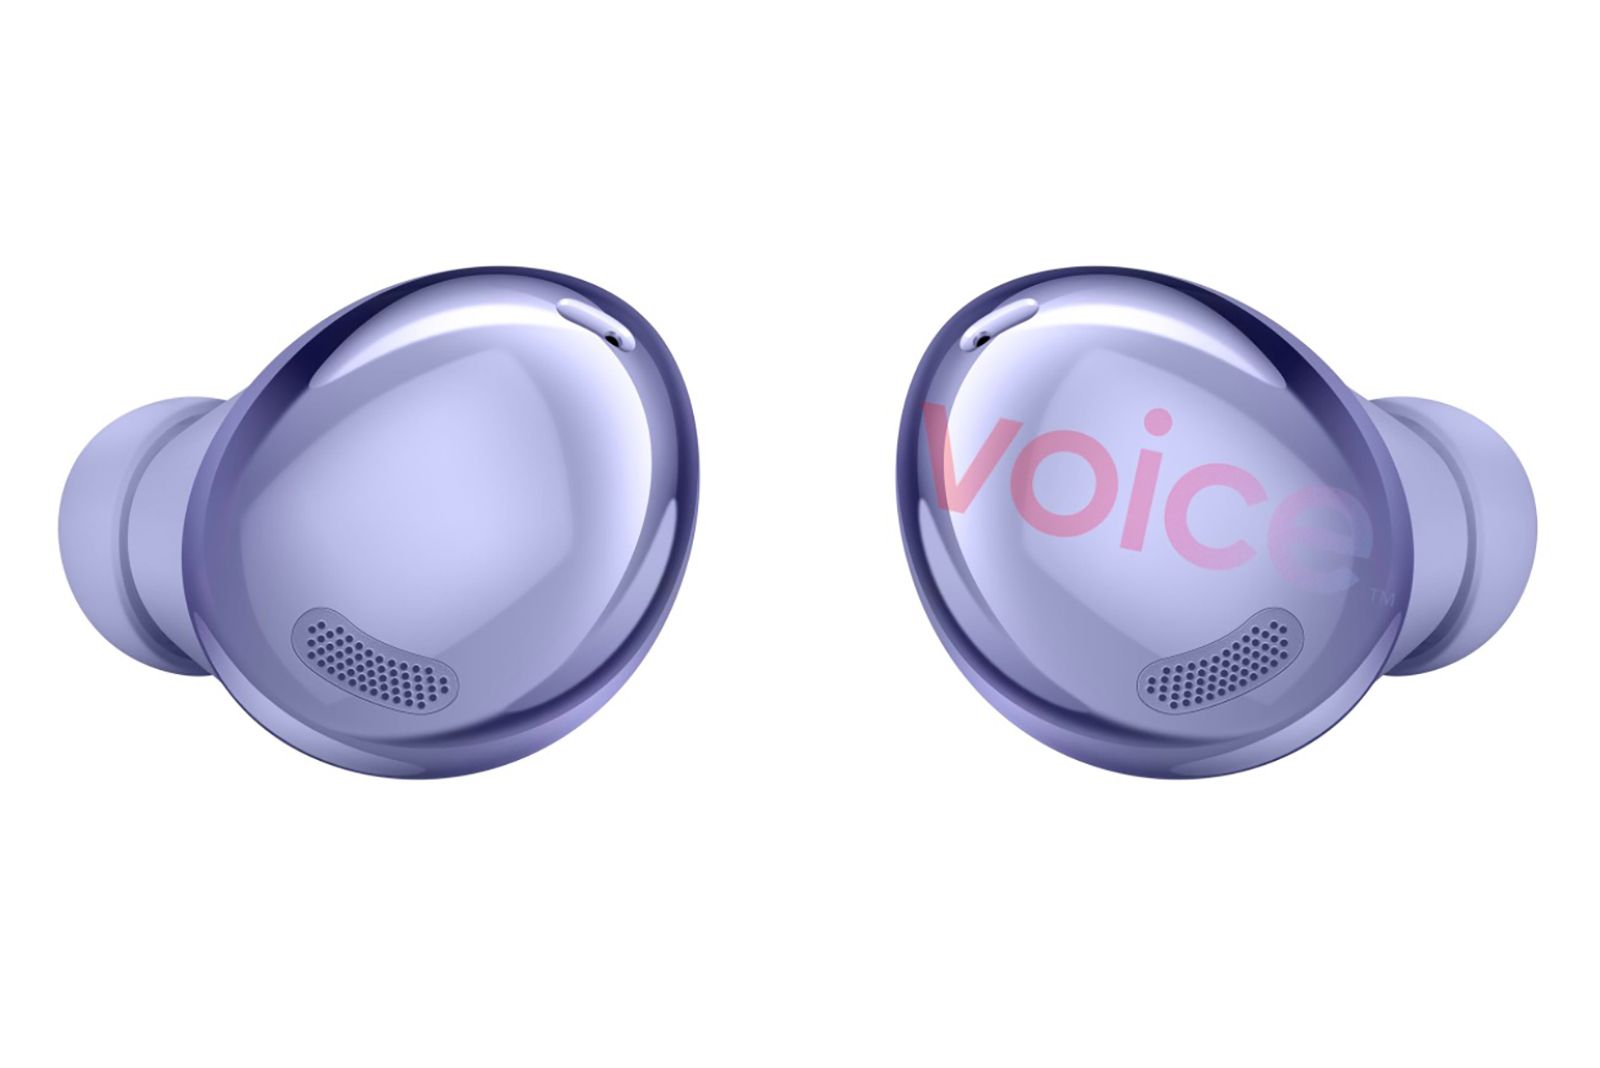 Leaked Galaxy Buds Pro image reveals new rounded design photo 1